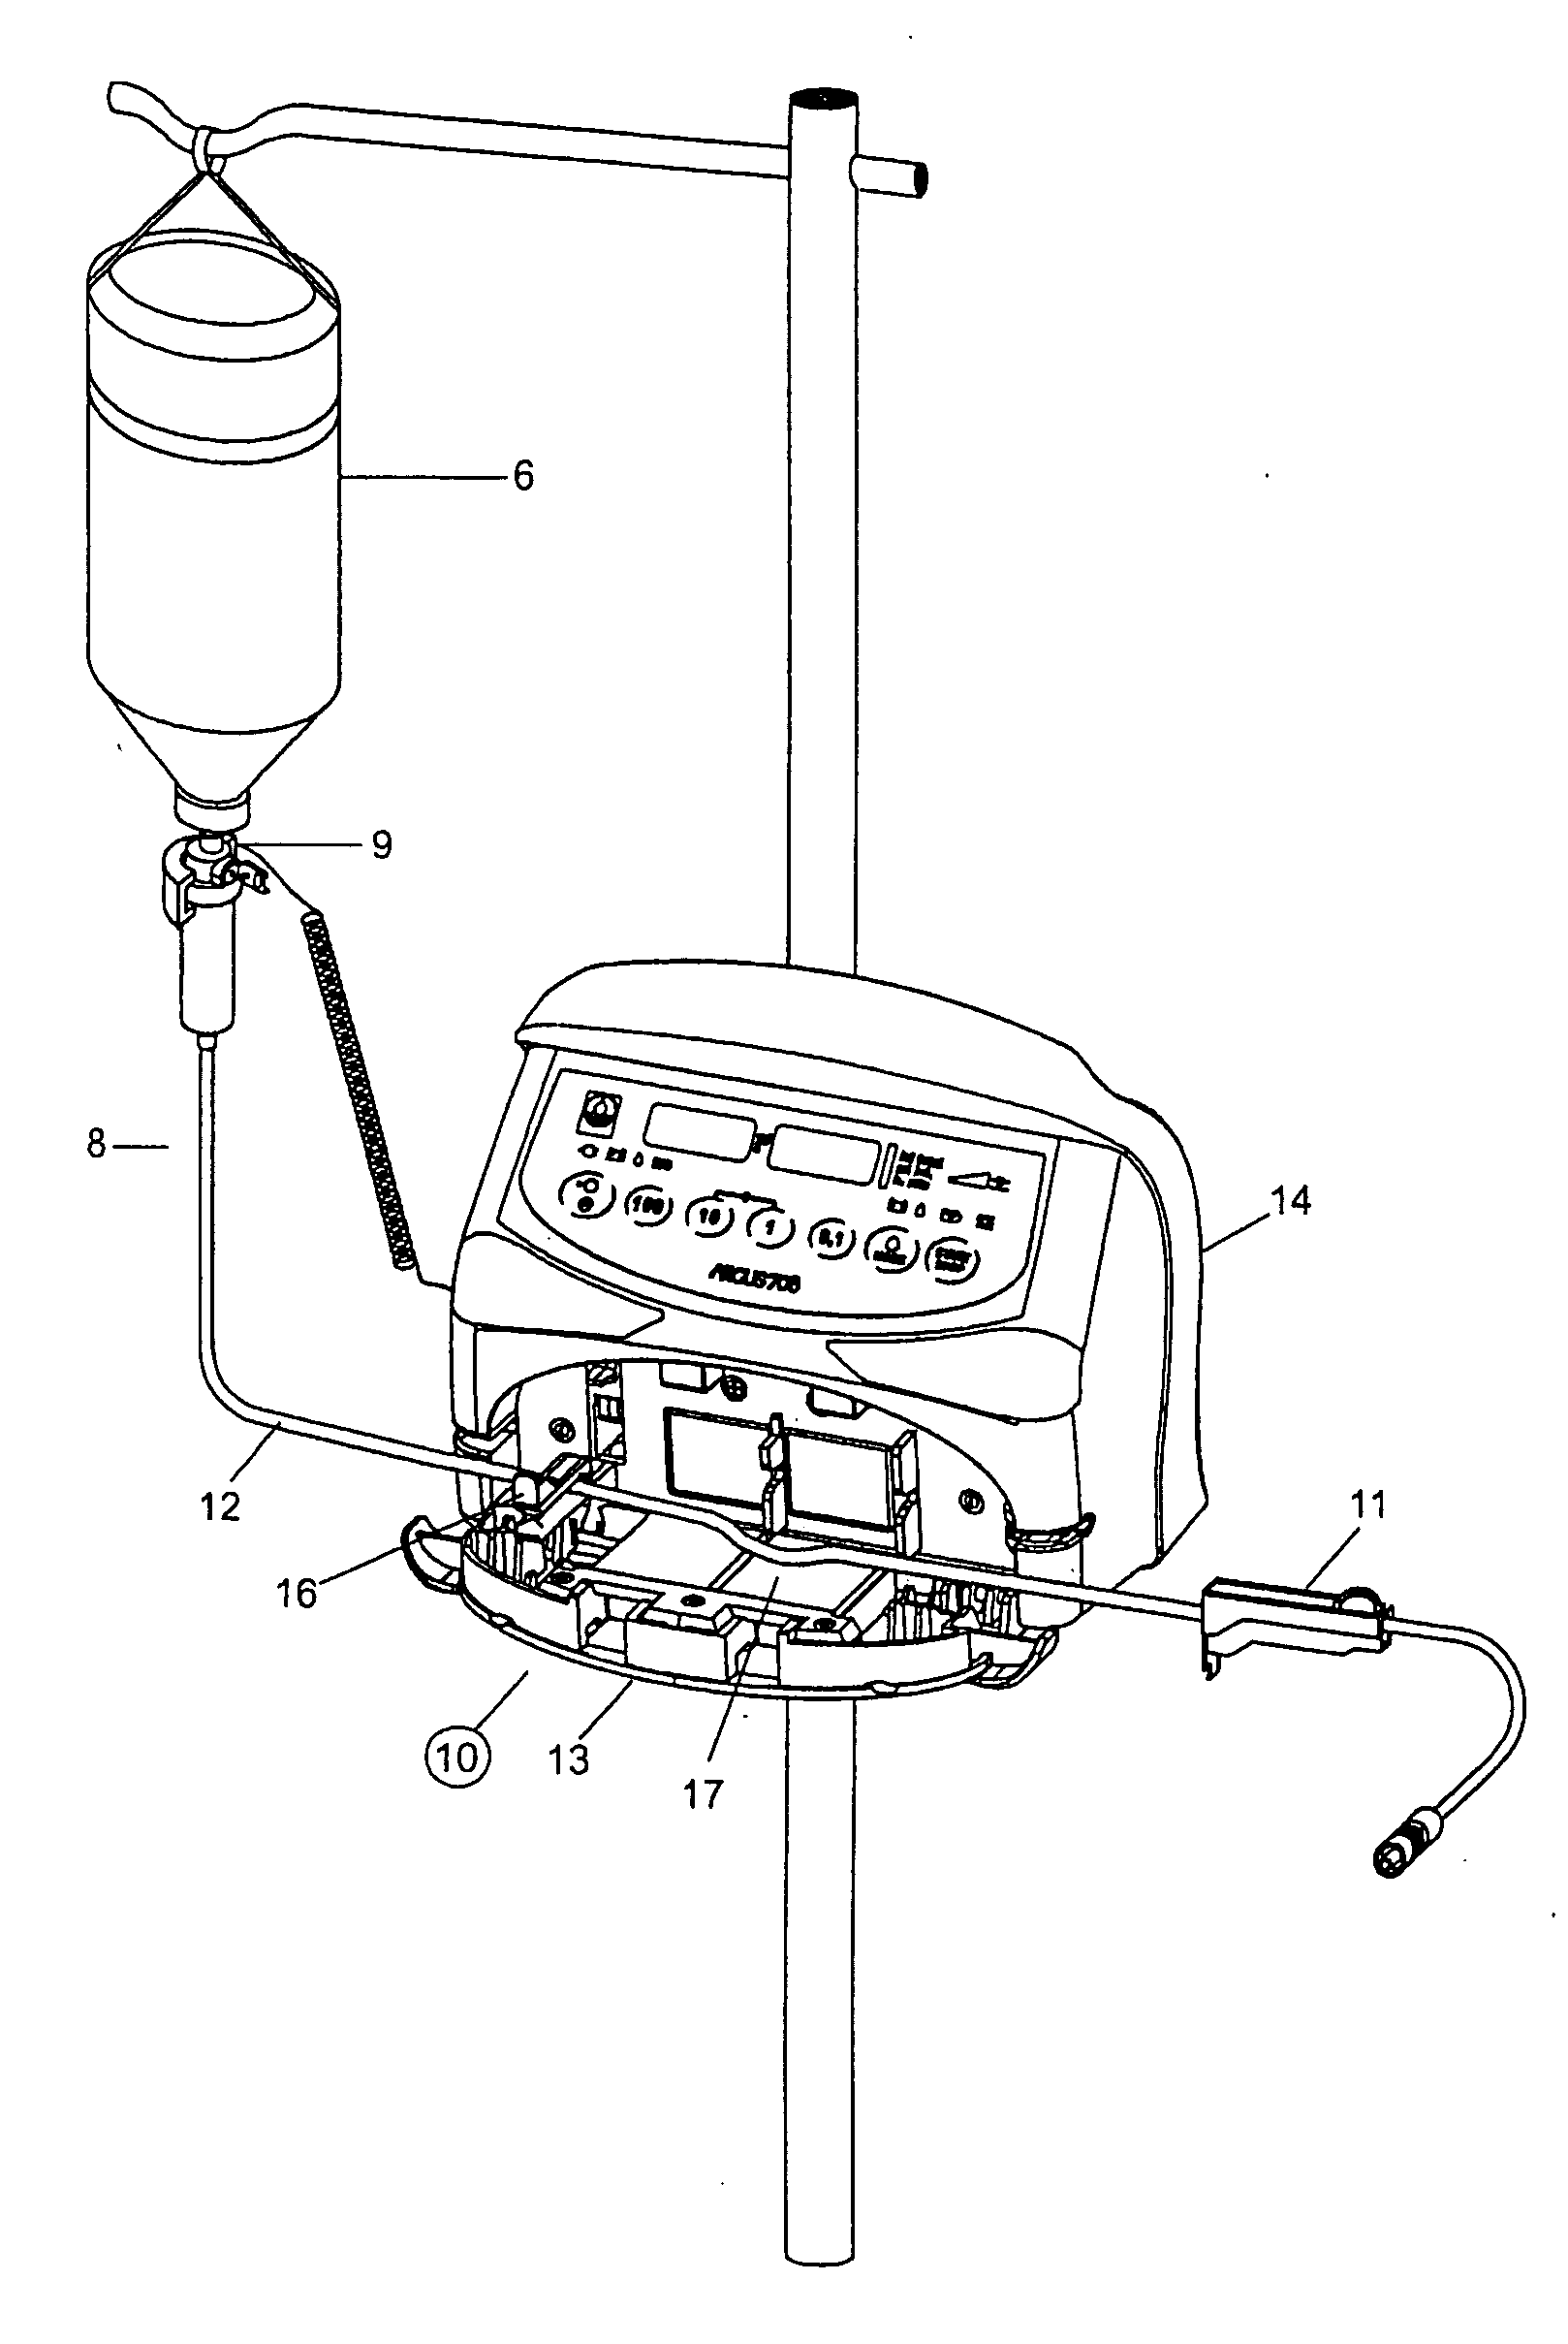 Arrangement for the coupling of an intravenous tube with infusion pump